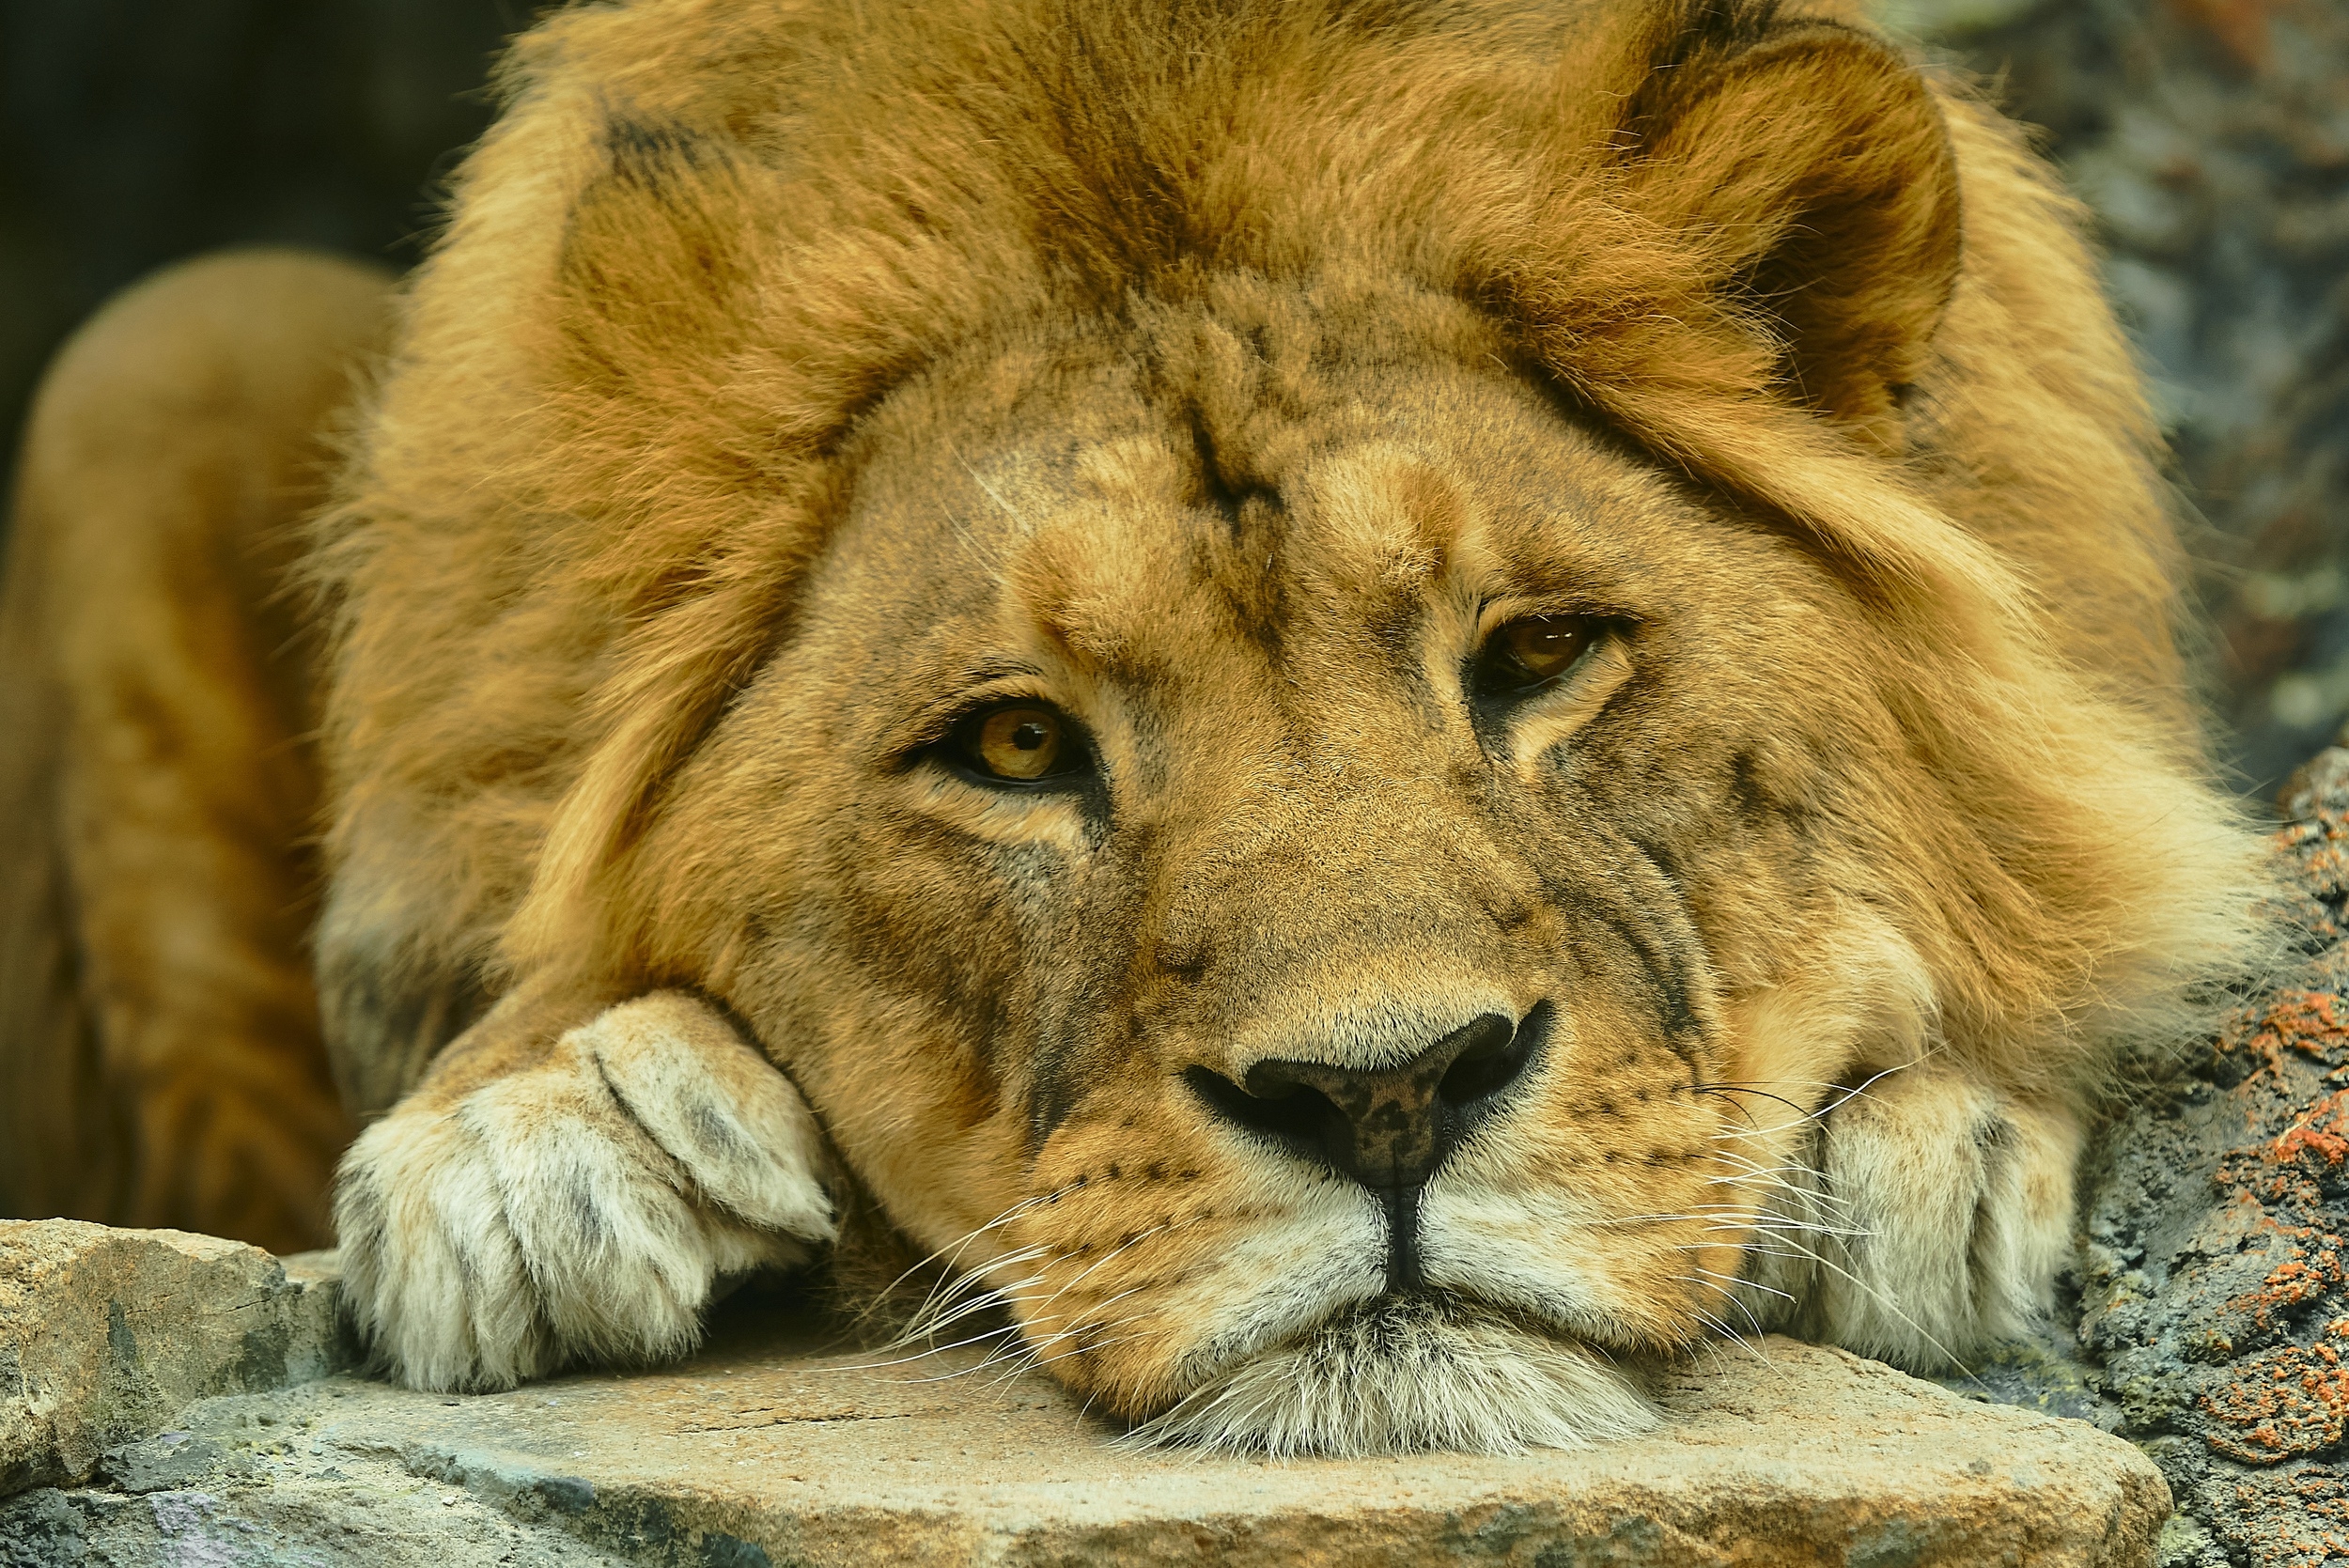 The old lion rests